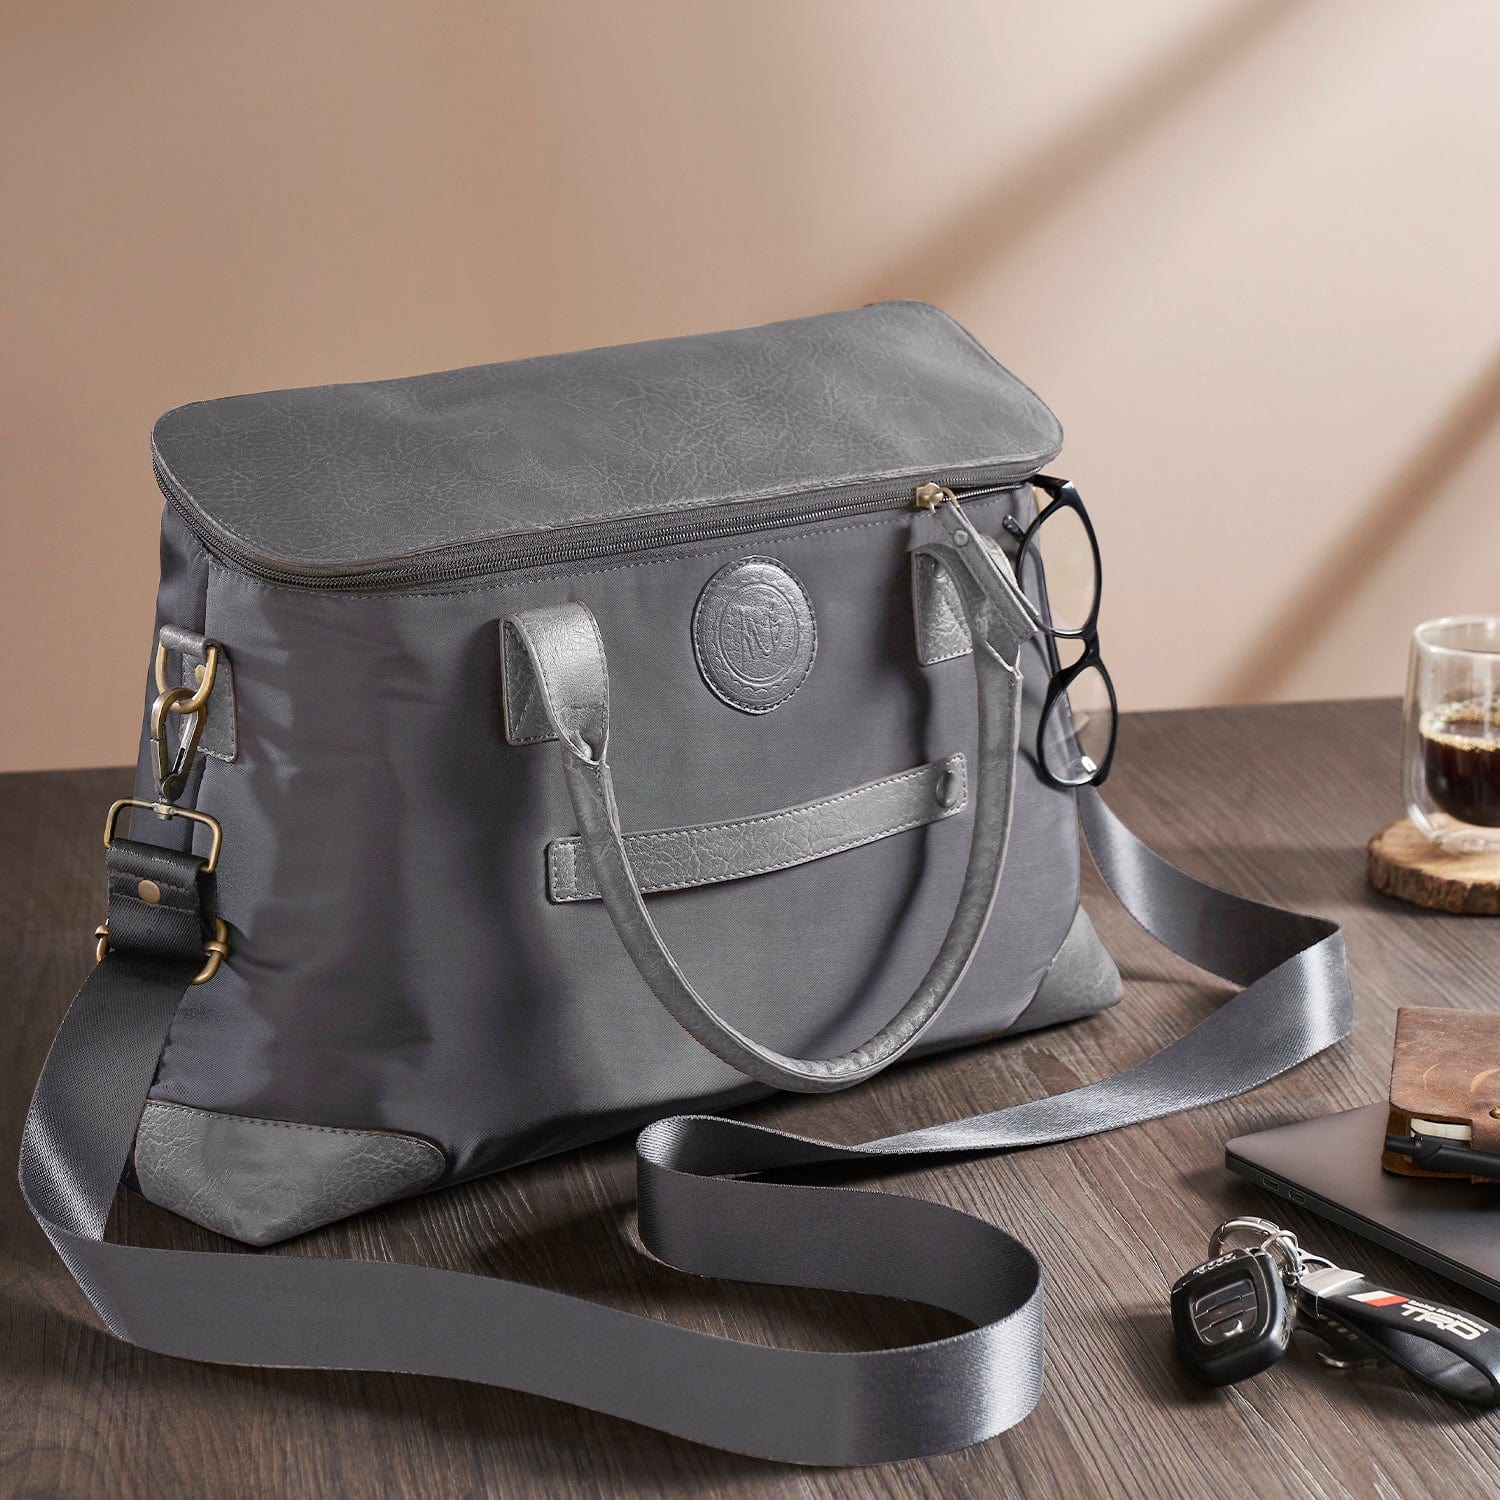 Mona B Unisex Messenger | Small Overnighter Bag for upto 14" Laptop/Mac Book/Tablet with Stylish Design: Ohio Magnet - RP-306 MGT - Overnighter by Mona-B - Backpack, Flash Sale, Sale, Shop2999, Shop3999